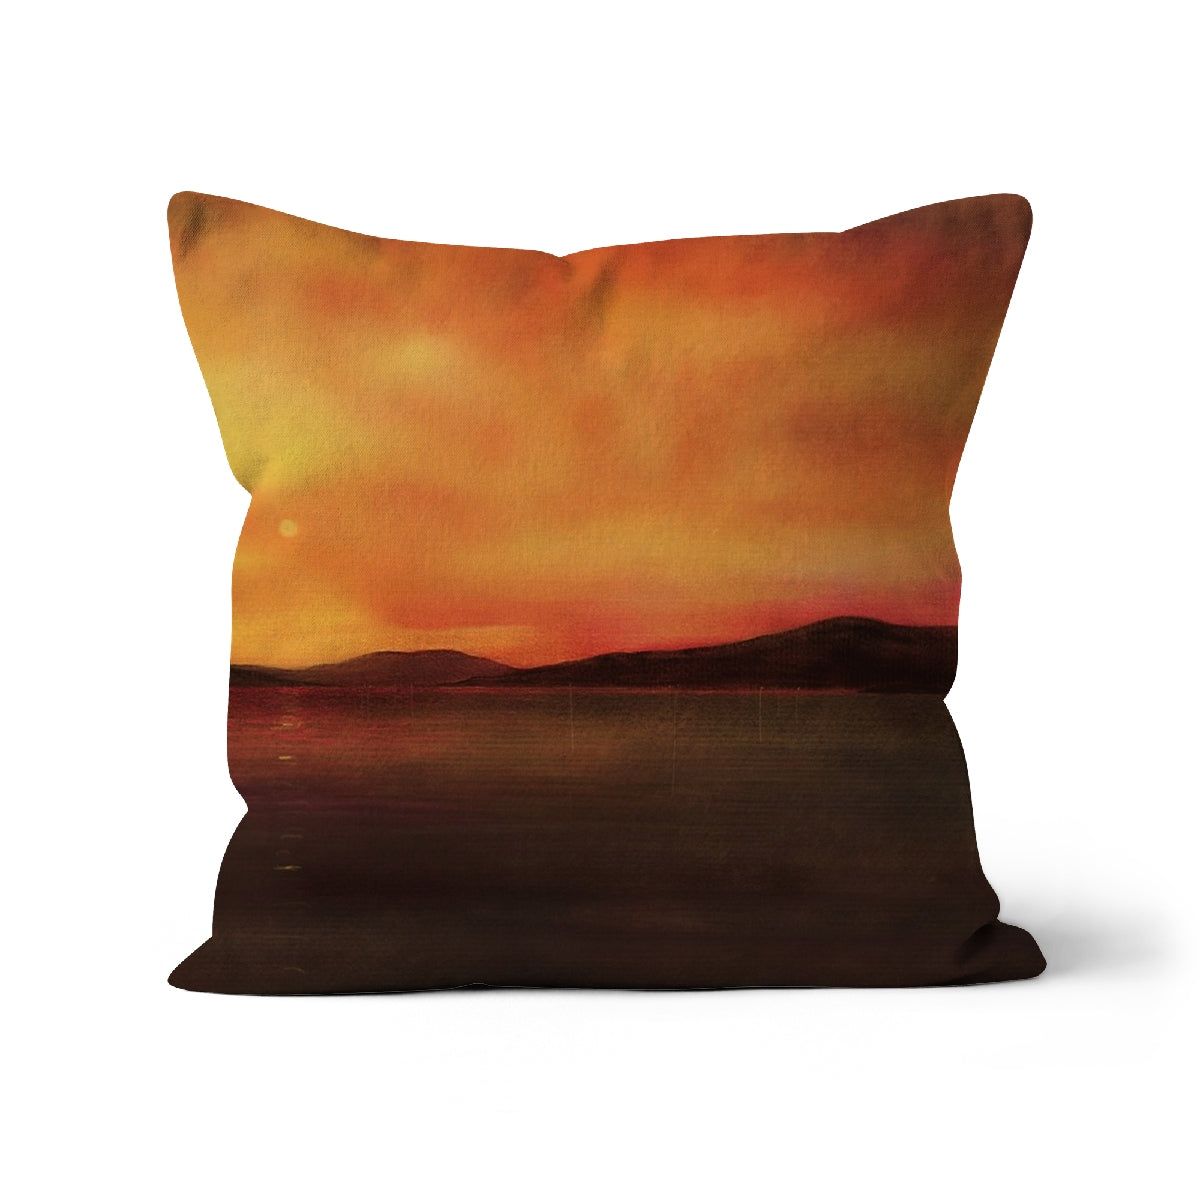 Harris Sunset Art Gifts Cushion-Cushions-Hebridean Islands Art Gallery-Canvas-22"x22"-Paintings, Prints, Homeware, Art Gifts From Scotland By Scottish Artist Kevin Hunter